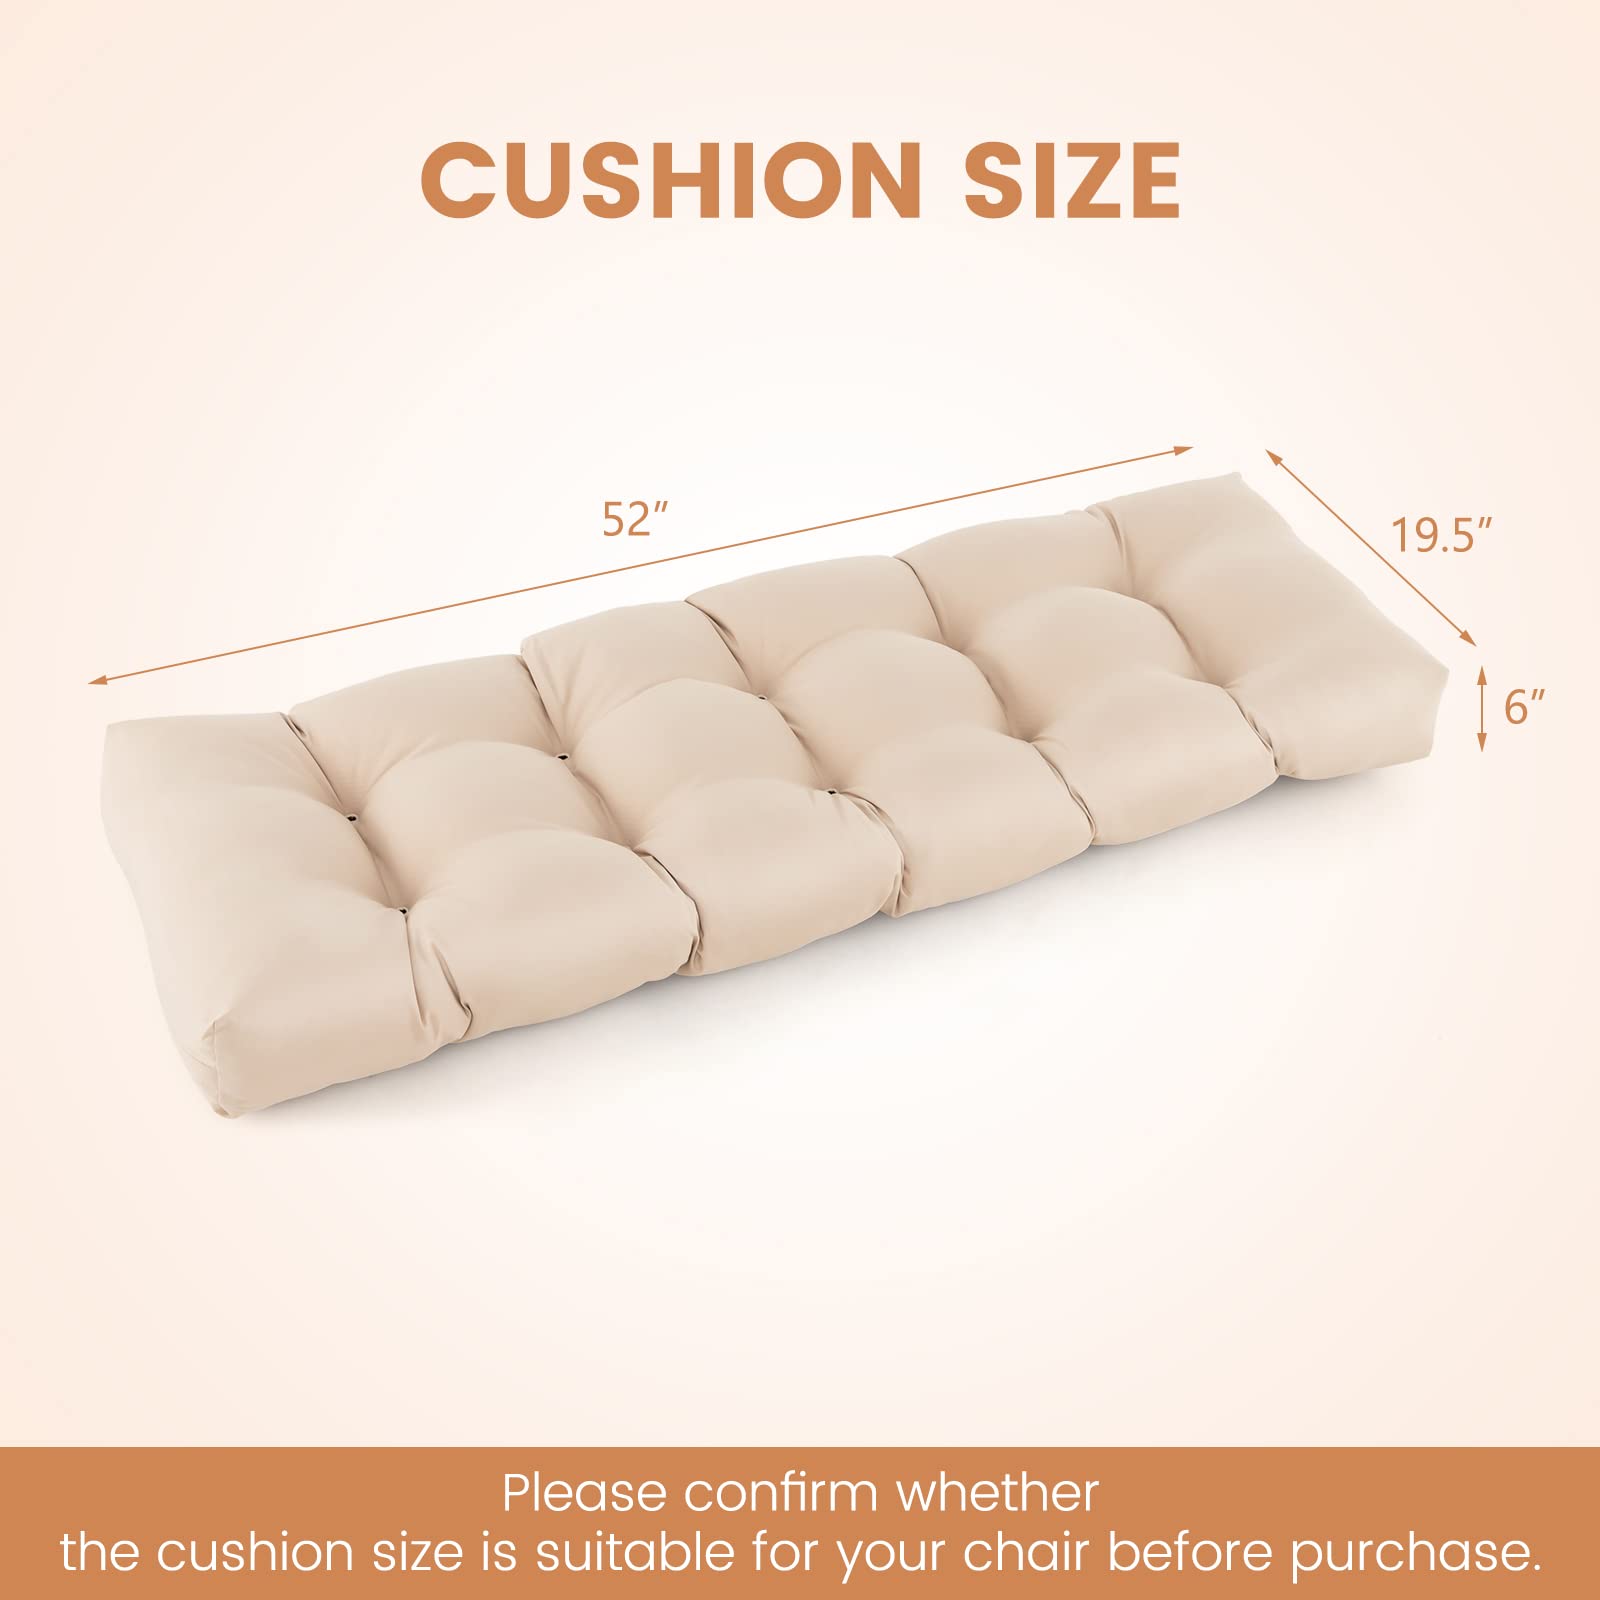 Giantex Outdoor Bench Cushion, 52 x 19.5 Inch Tufted Patio Cushion Pads for Garden Sofa Settee Couch